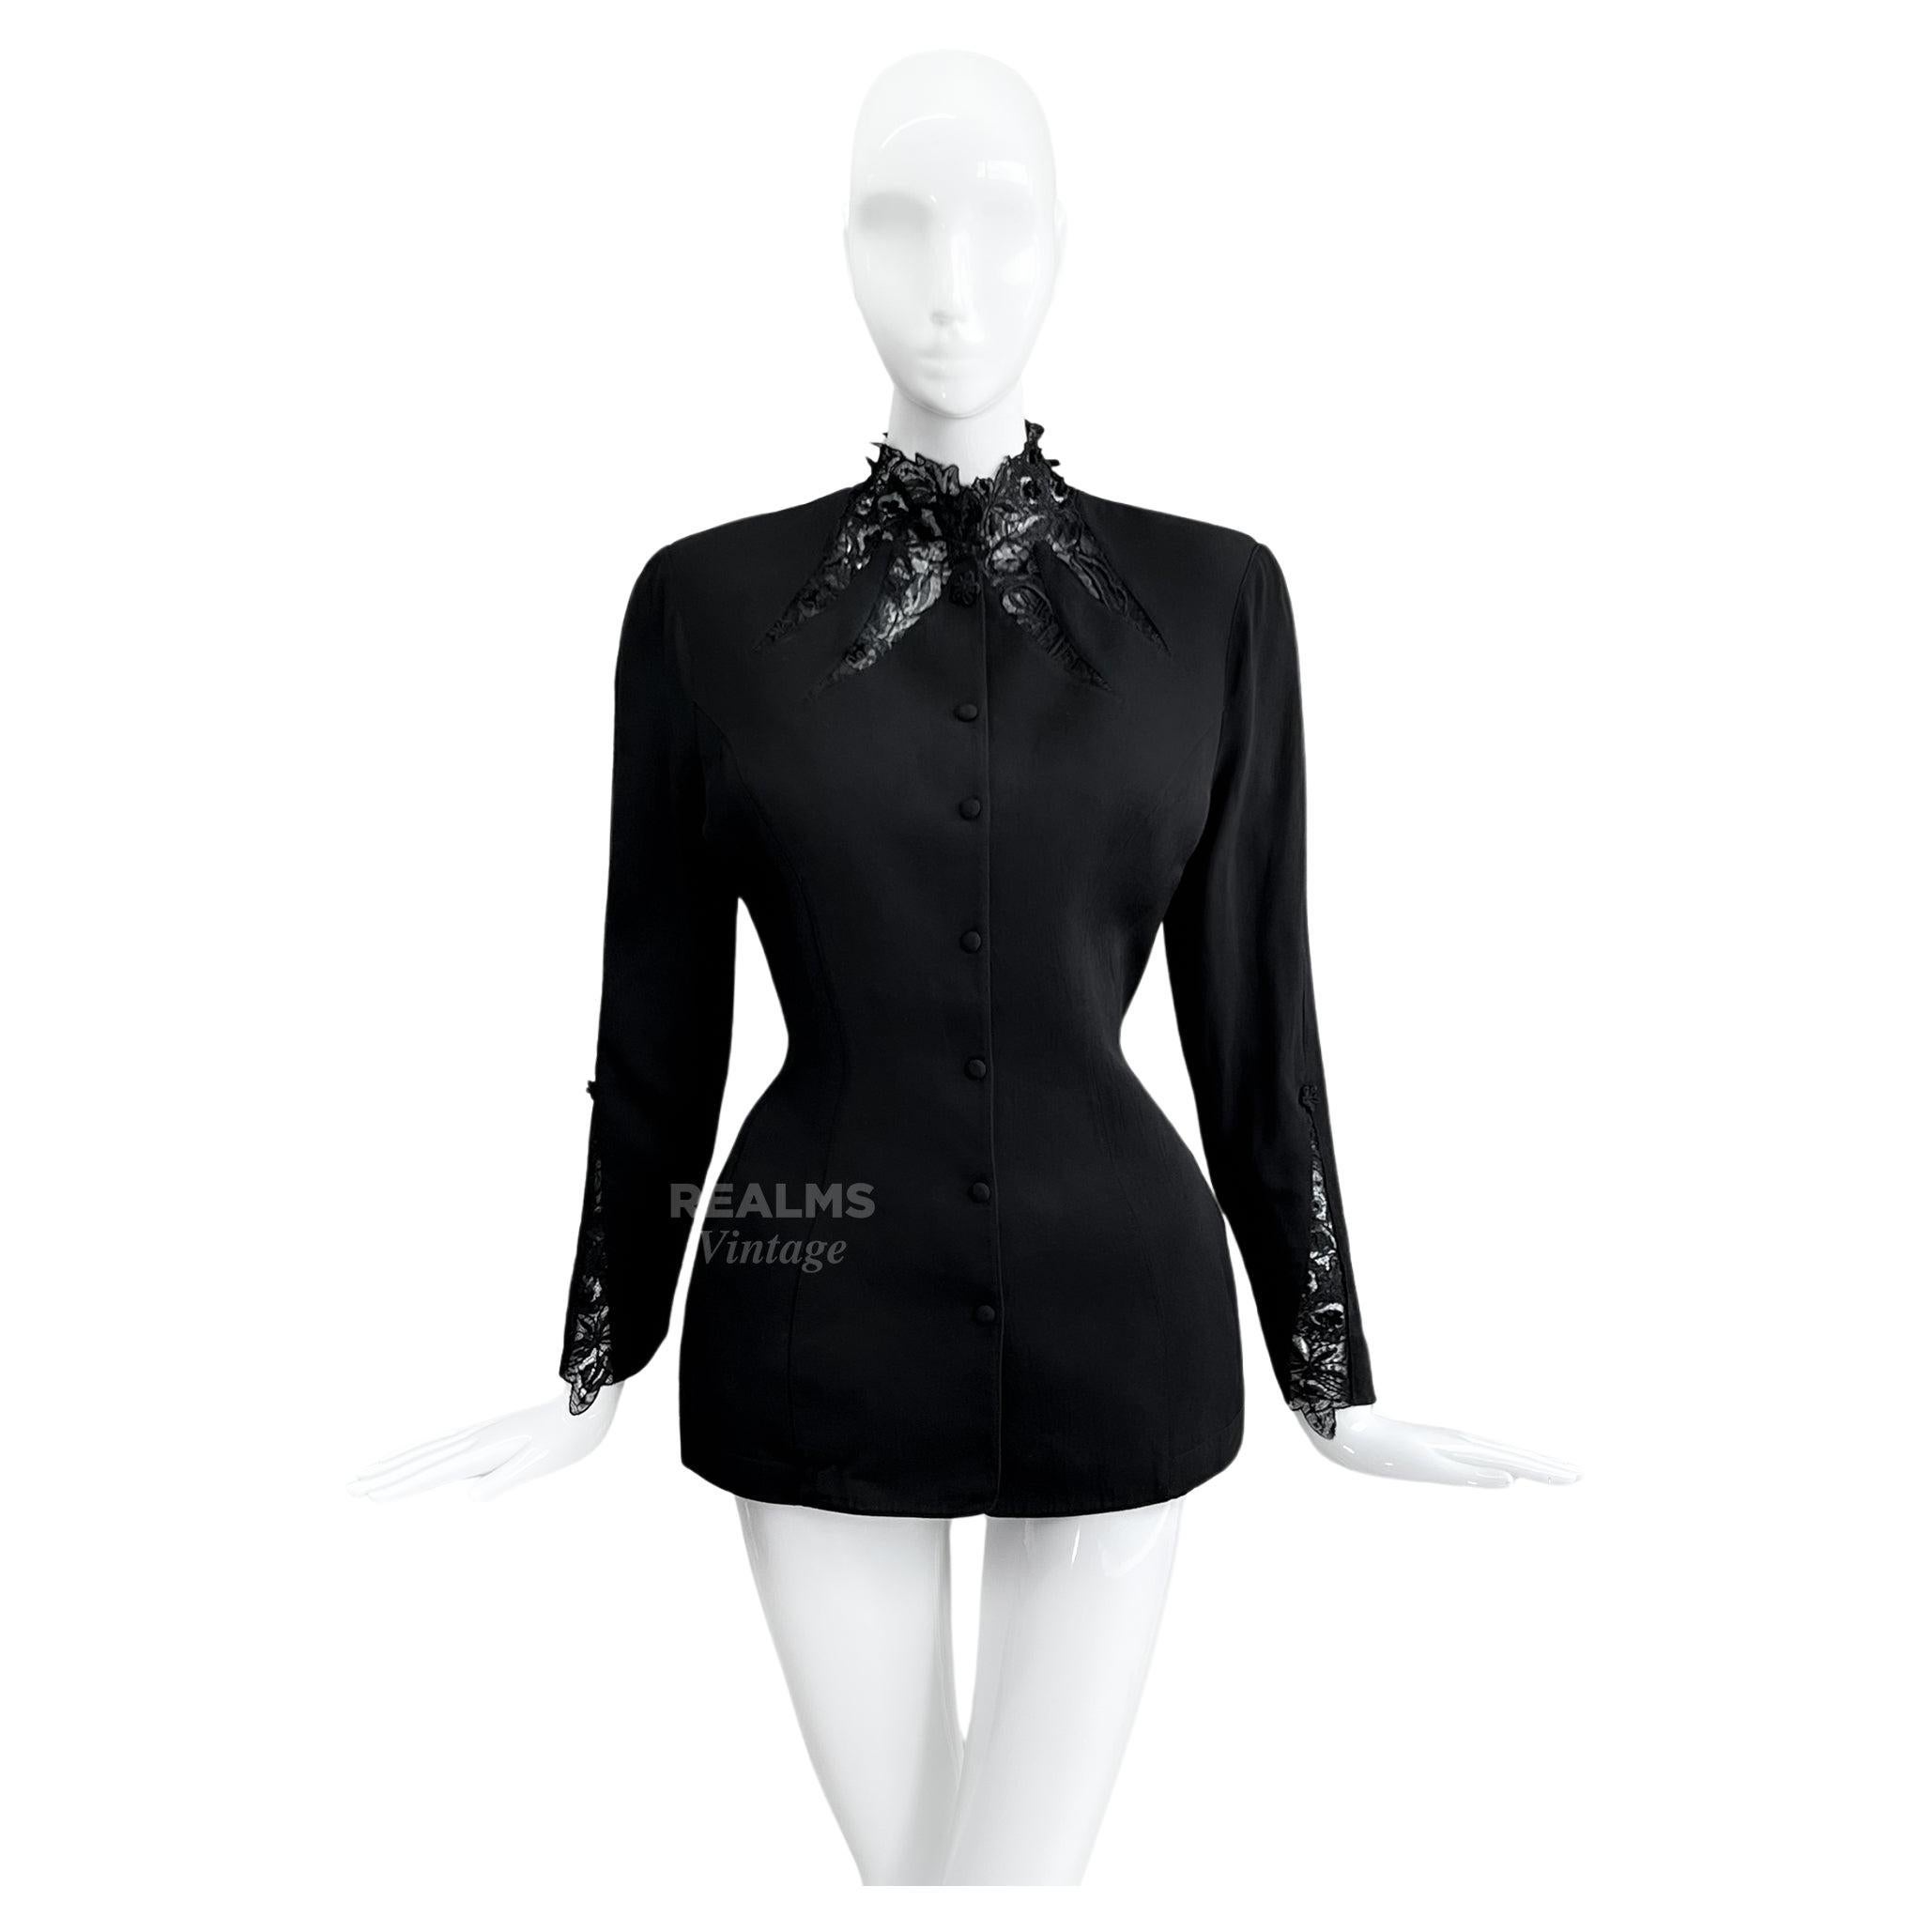 
Seductive black Thierry Mugler jacket with fabulous cutout lace details. Stunning fitted jacket from the SS 1992 Collection. Fabulous tailoring, super feminine fitted silhouette.
The perfect femme fatale look - a great mix of luxury chic with